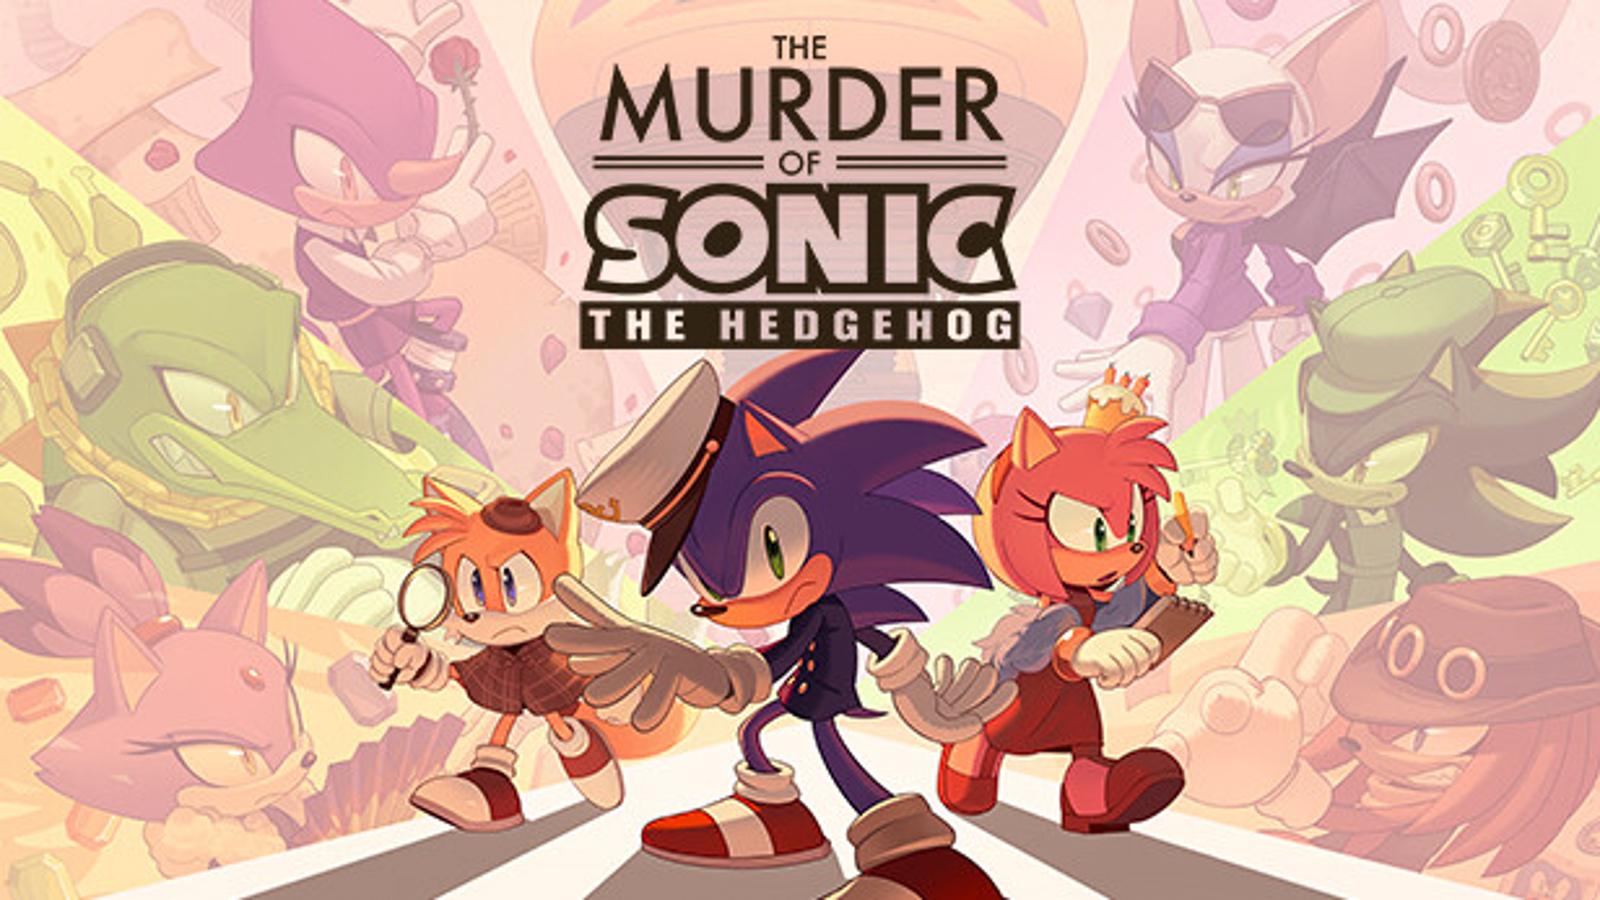 The Murder of Sonic the Hedgehog is a free game released on April Fools' Day.